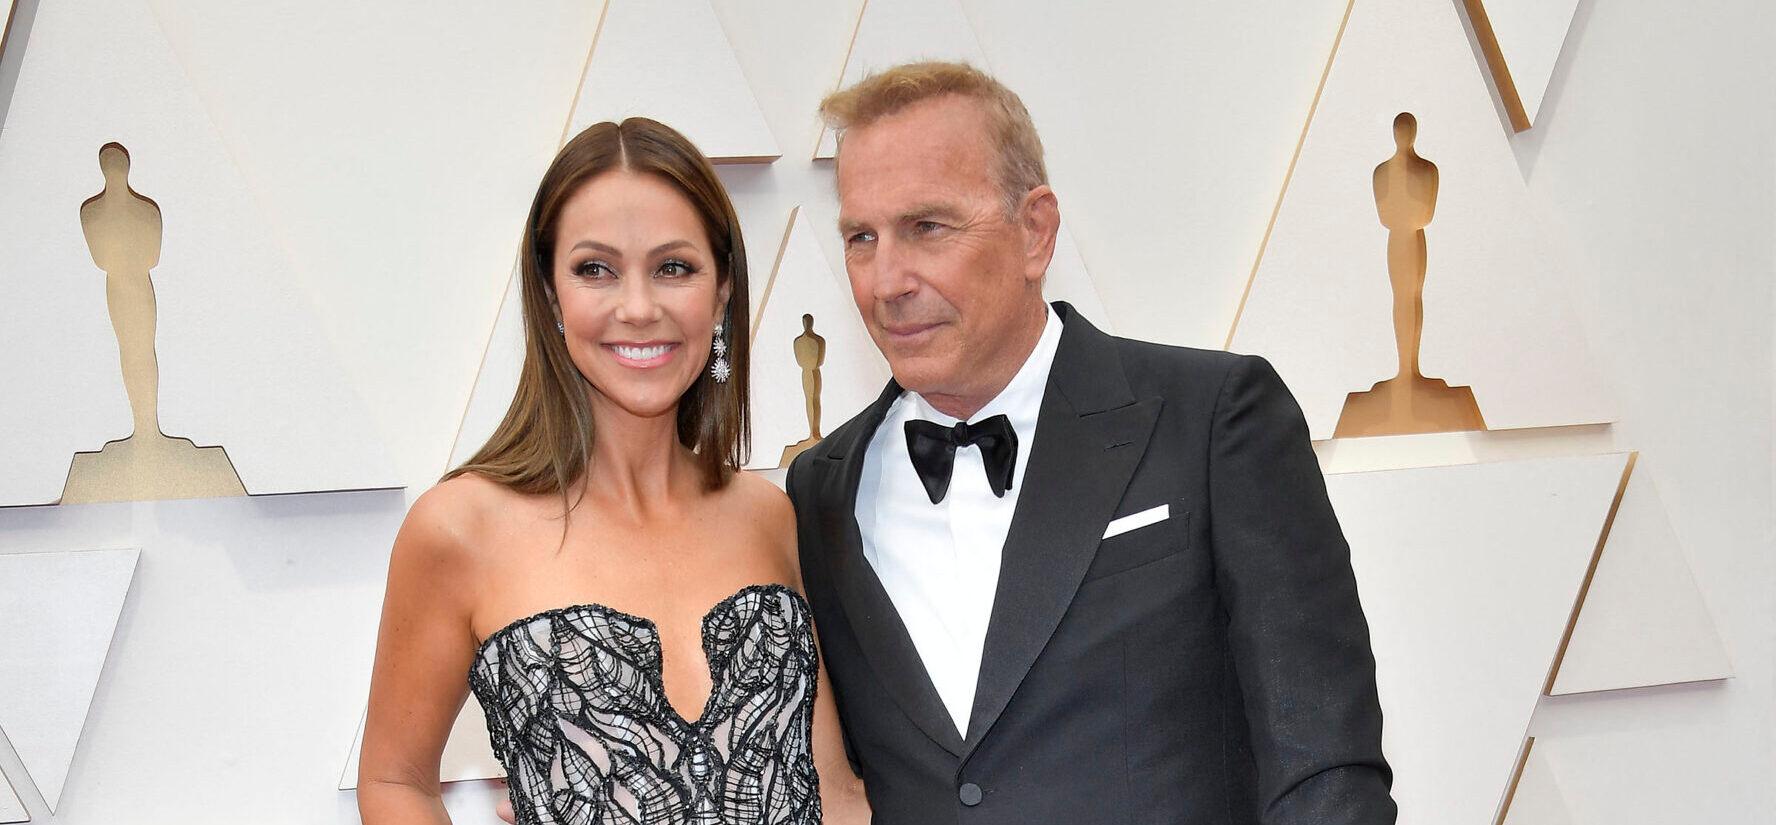 Kevin Costner Is Allegedly ‘Bitter’ About His Ex-wife Dating His Banker Friend